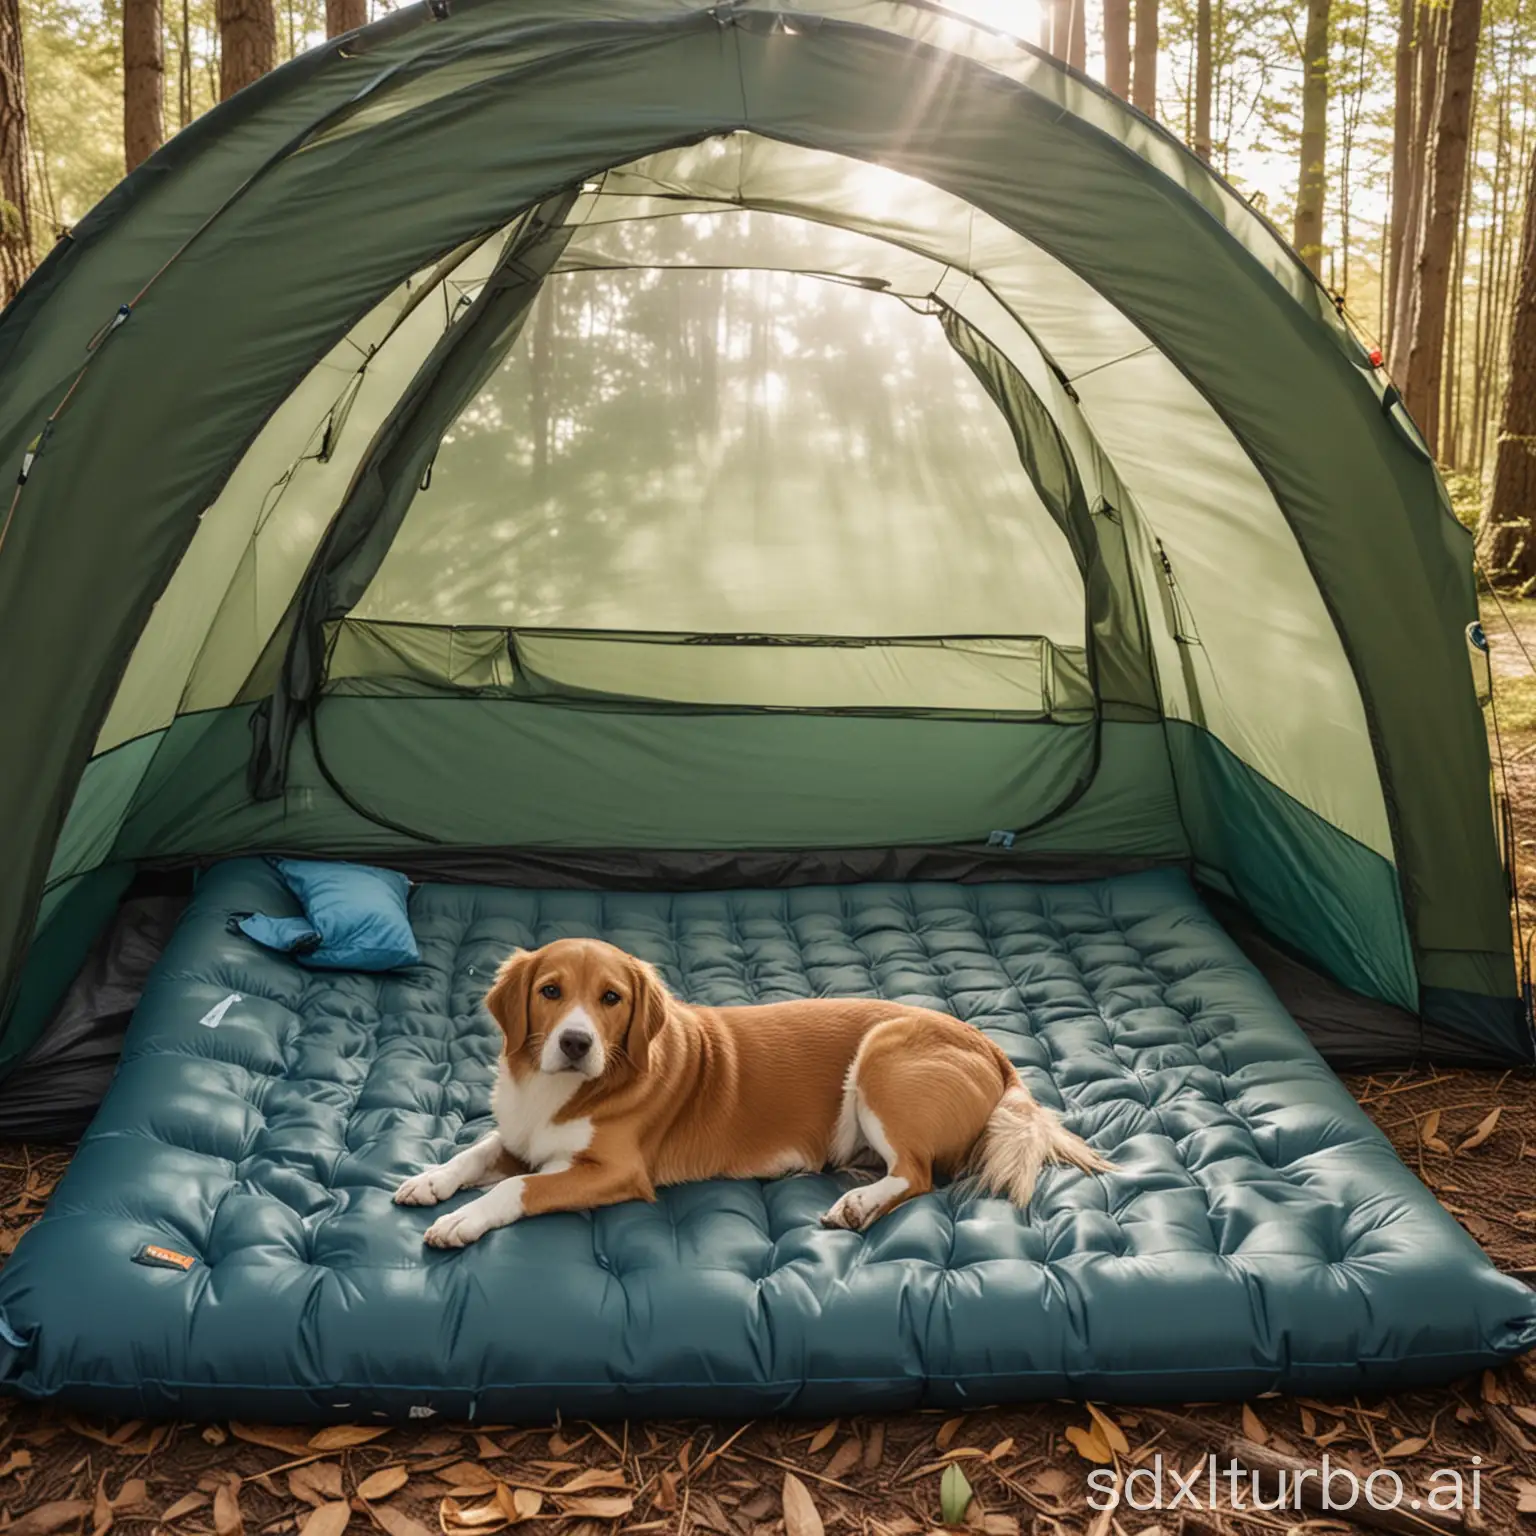 Peacock-Blue-Inflatable-Sleeping-Mat-with-Puppy-in-Camping-Tent